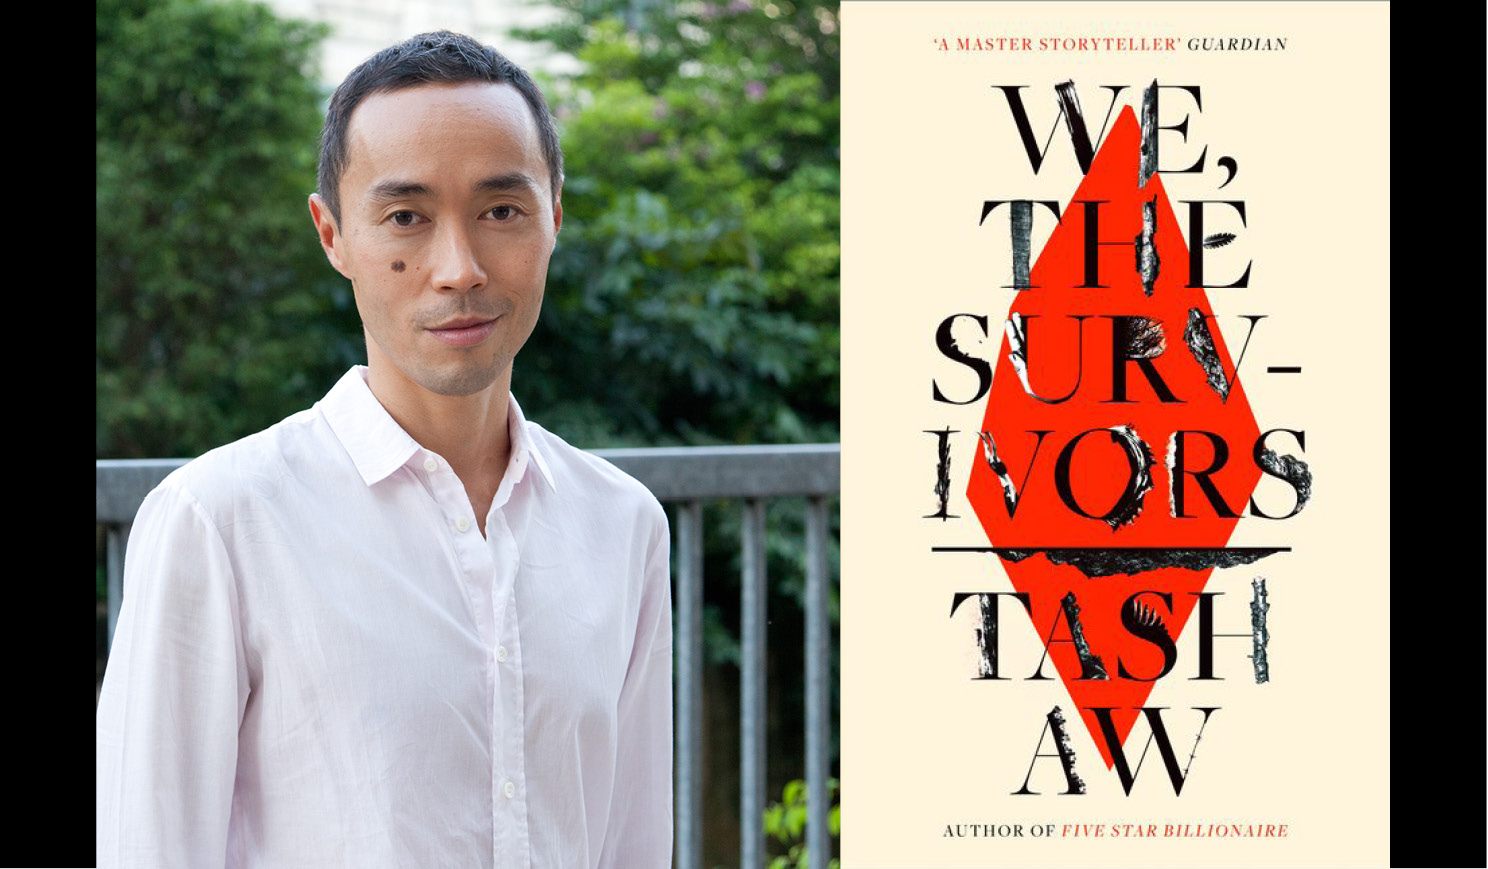 Tash Aw's headshot alongside the cover of his book We, the Survivors